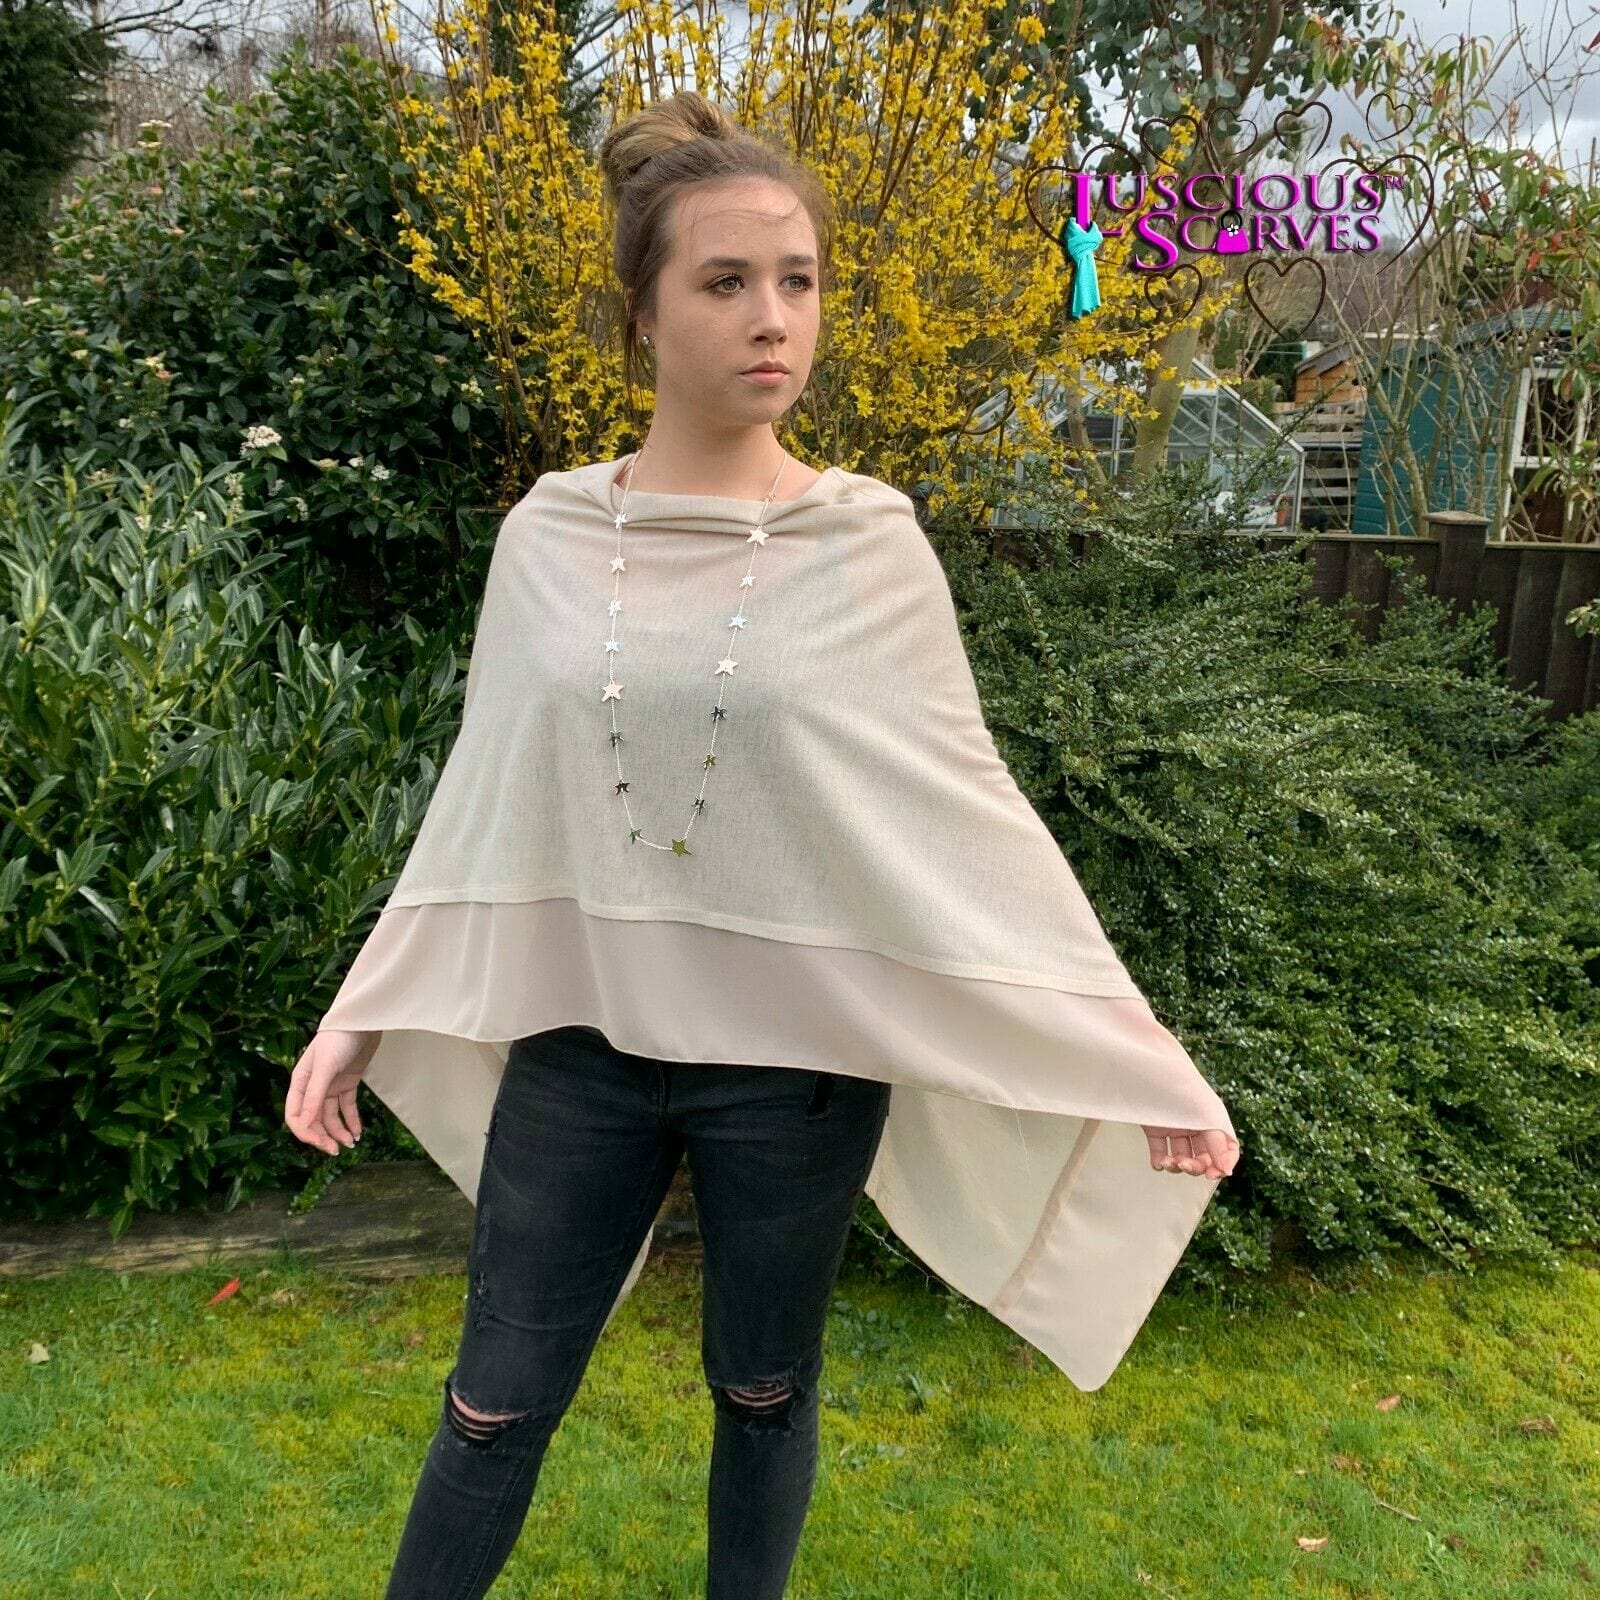 lusciousscarves Poncho Liners Pale Beige Light Weight Poncho